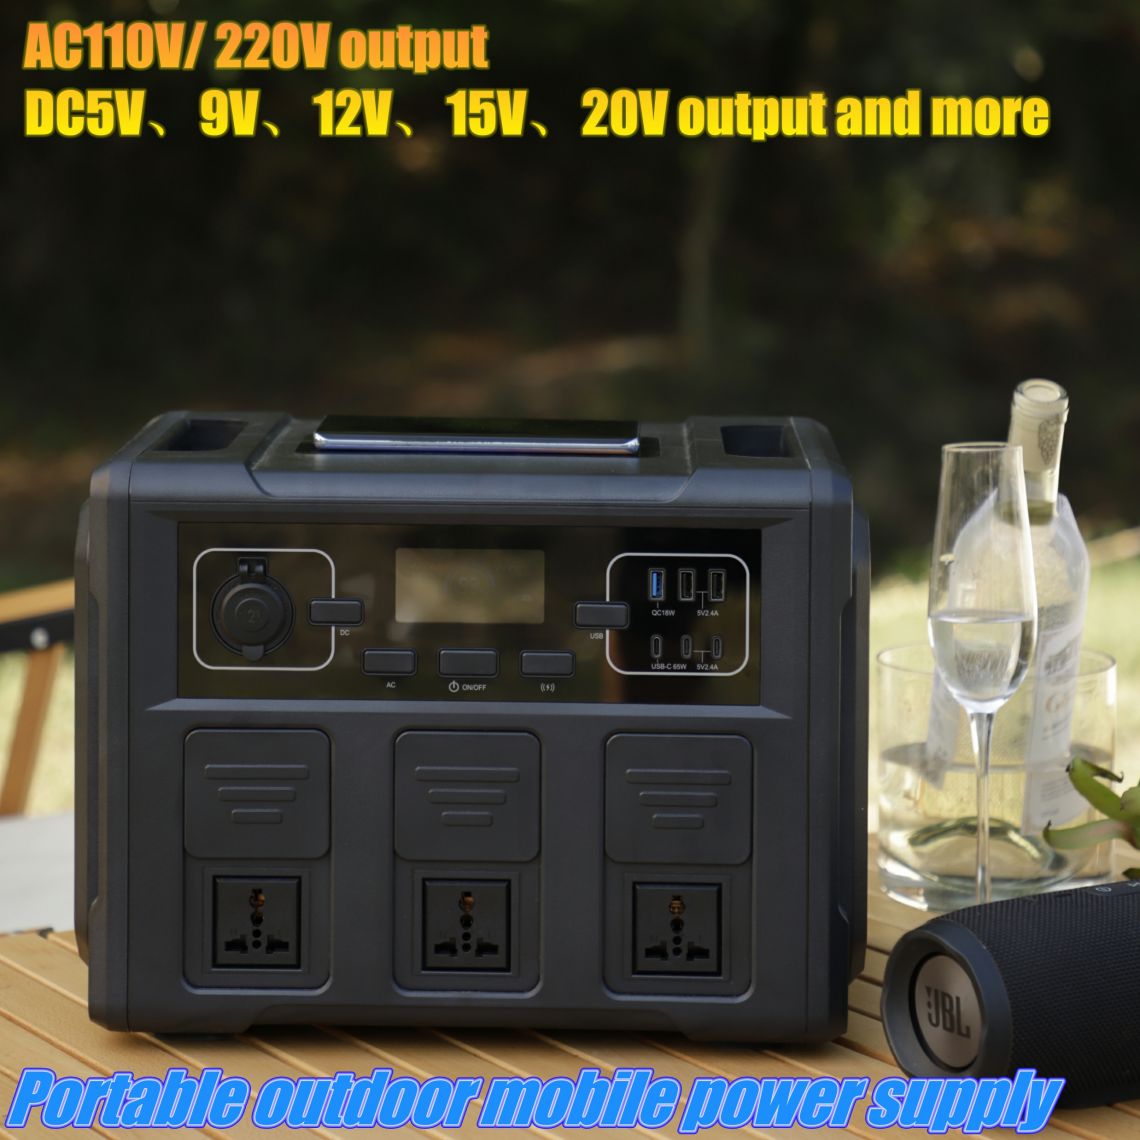 Outdoor high power mobile energy storage power supply Portable Generator